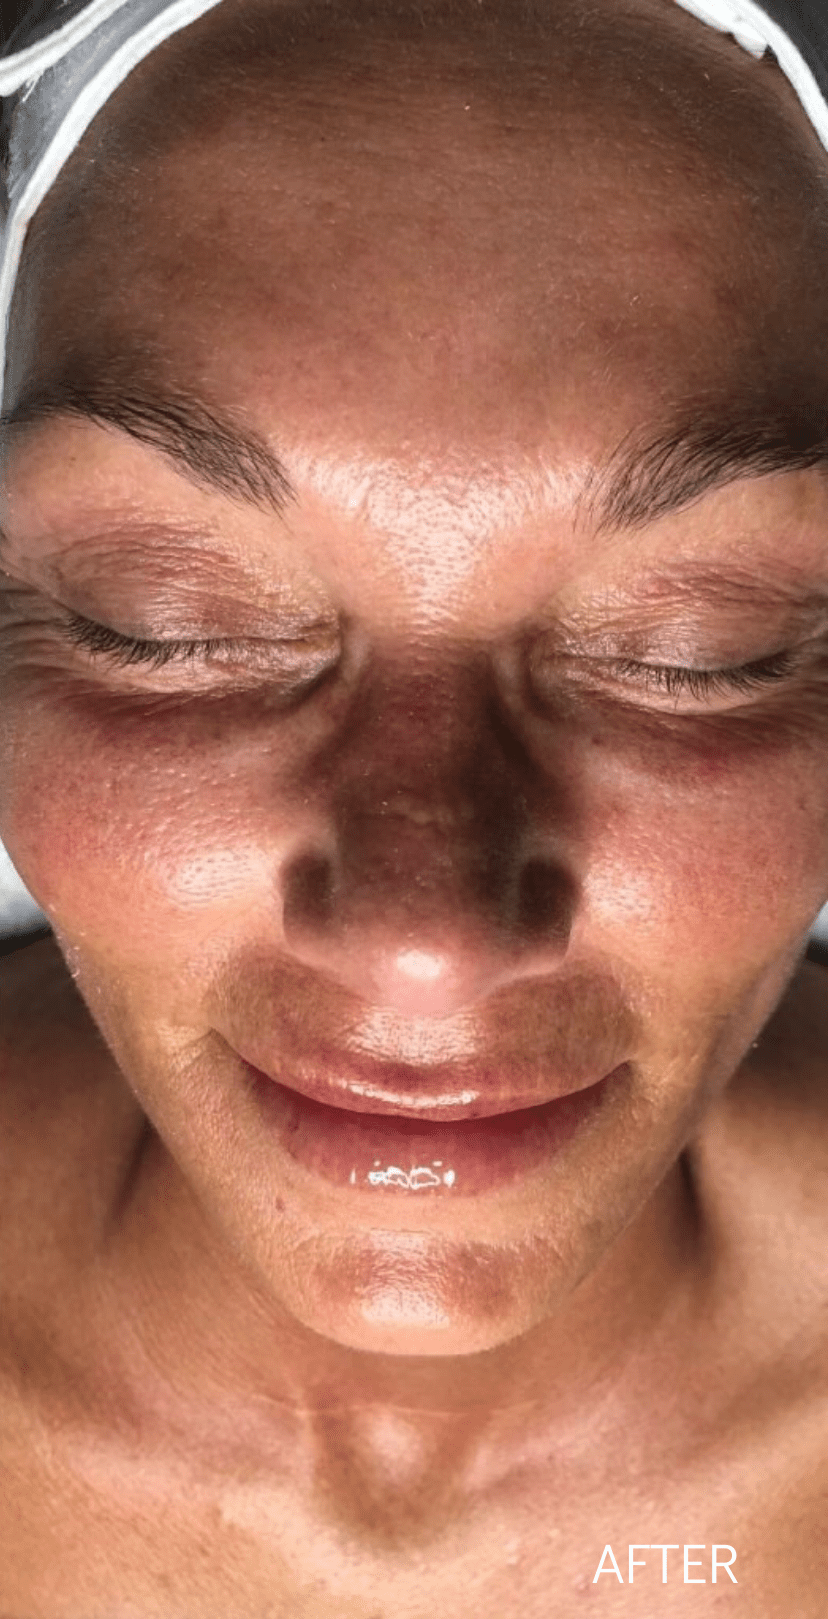 Microdermabrasion After - Spa Services and Spa Treatment in Birmingham | Spa Cahaba